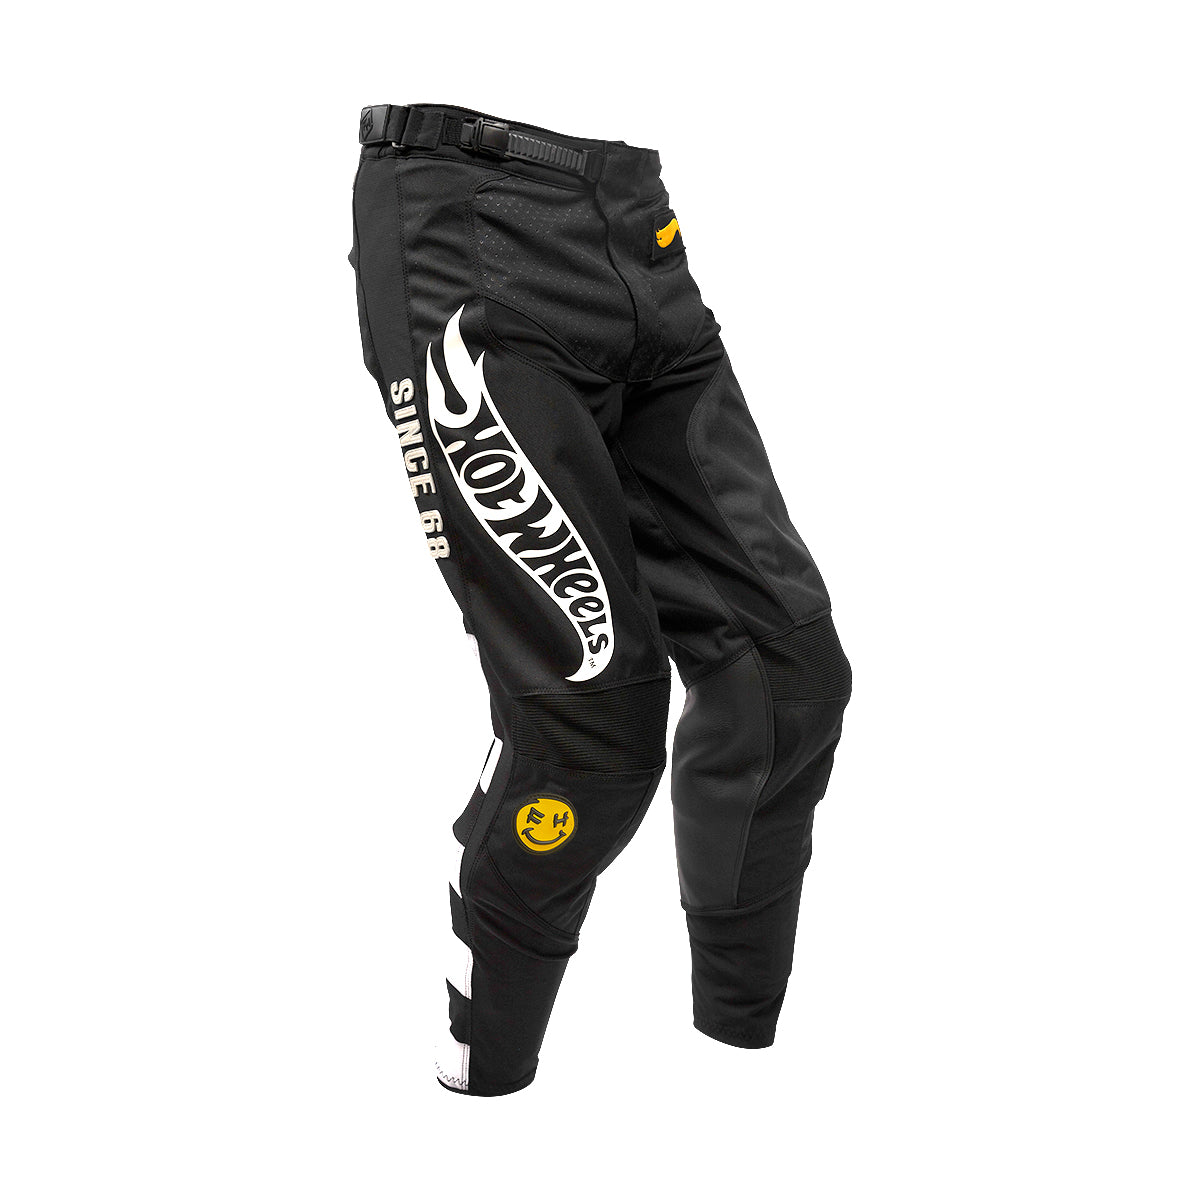 Hot Wheels Grindhouse Youth Pant - Black